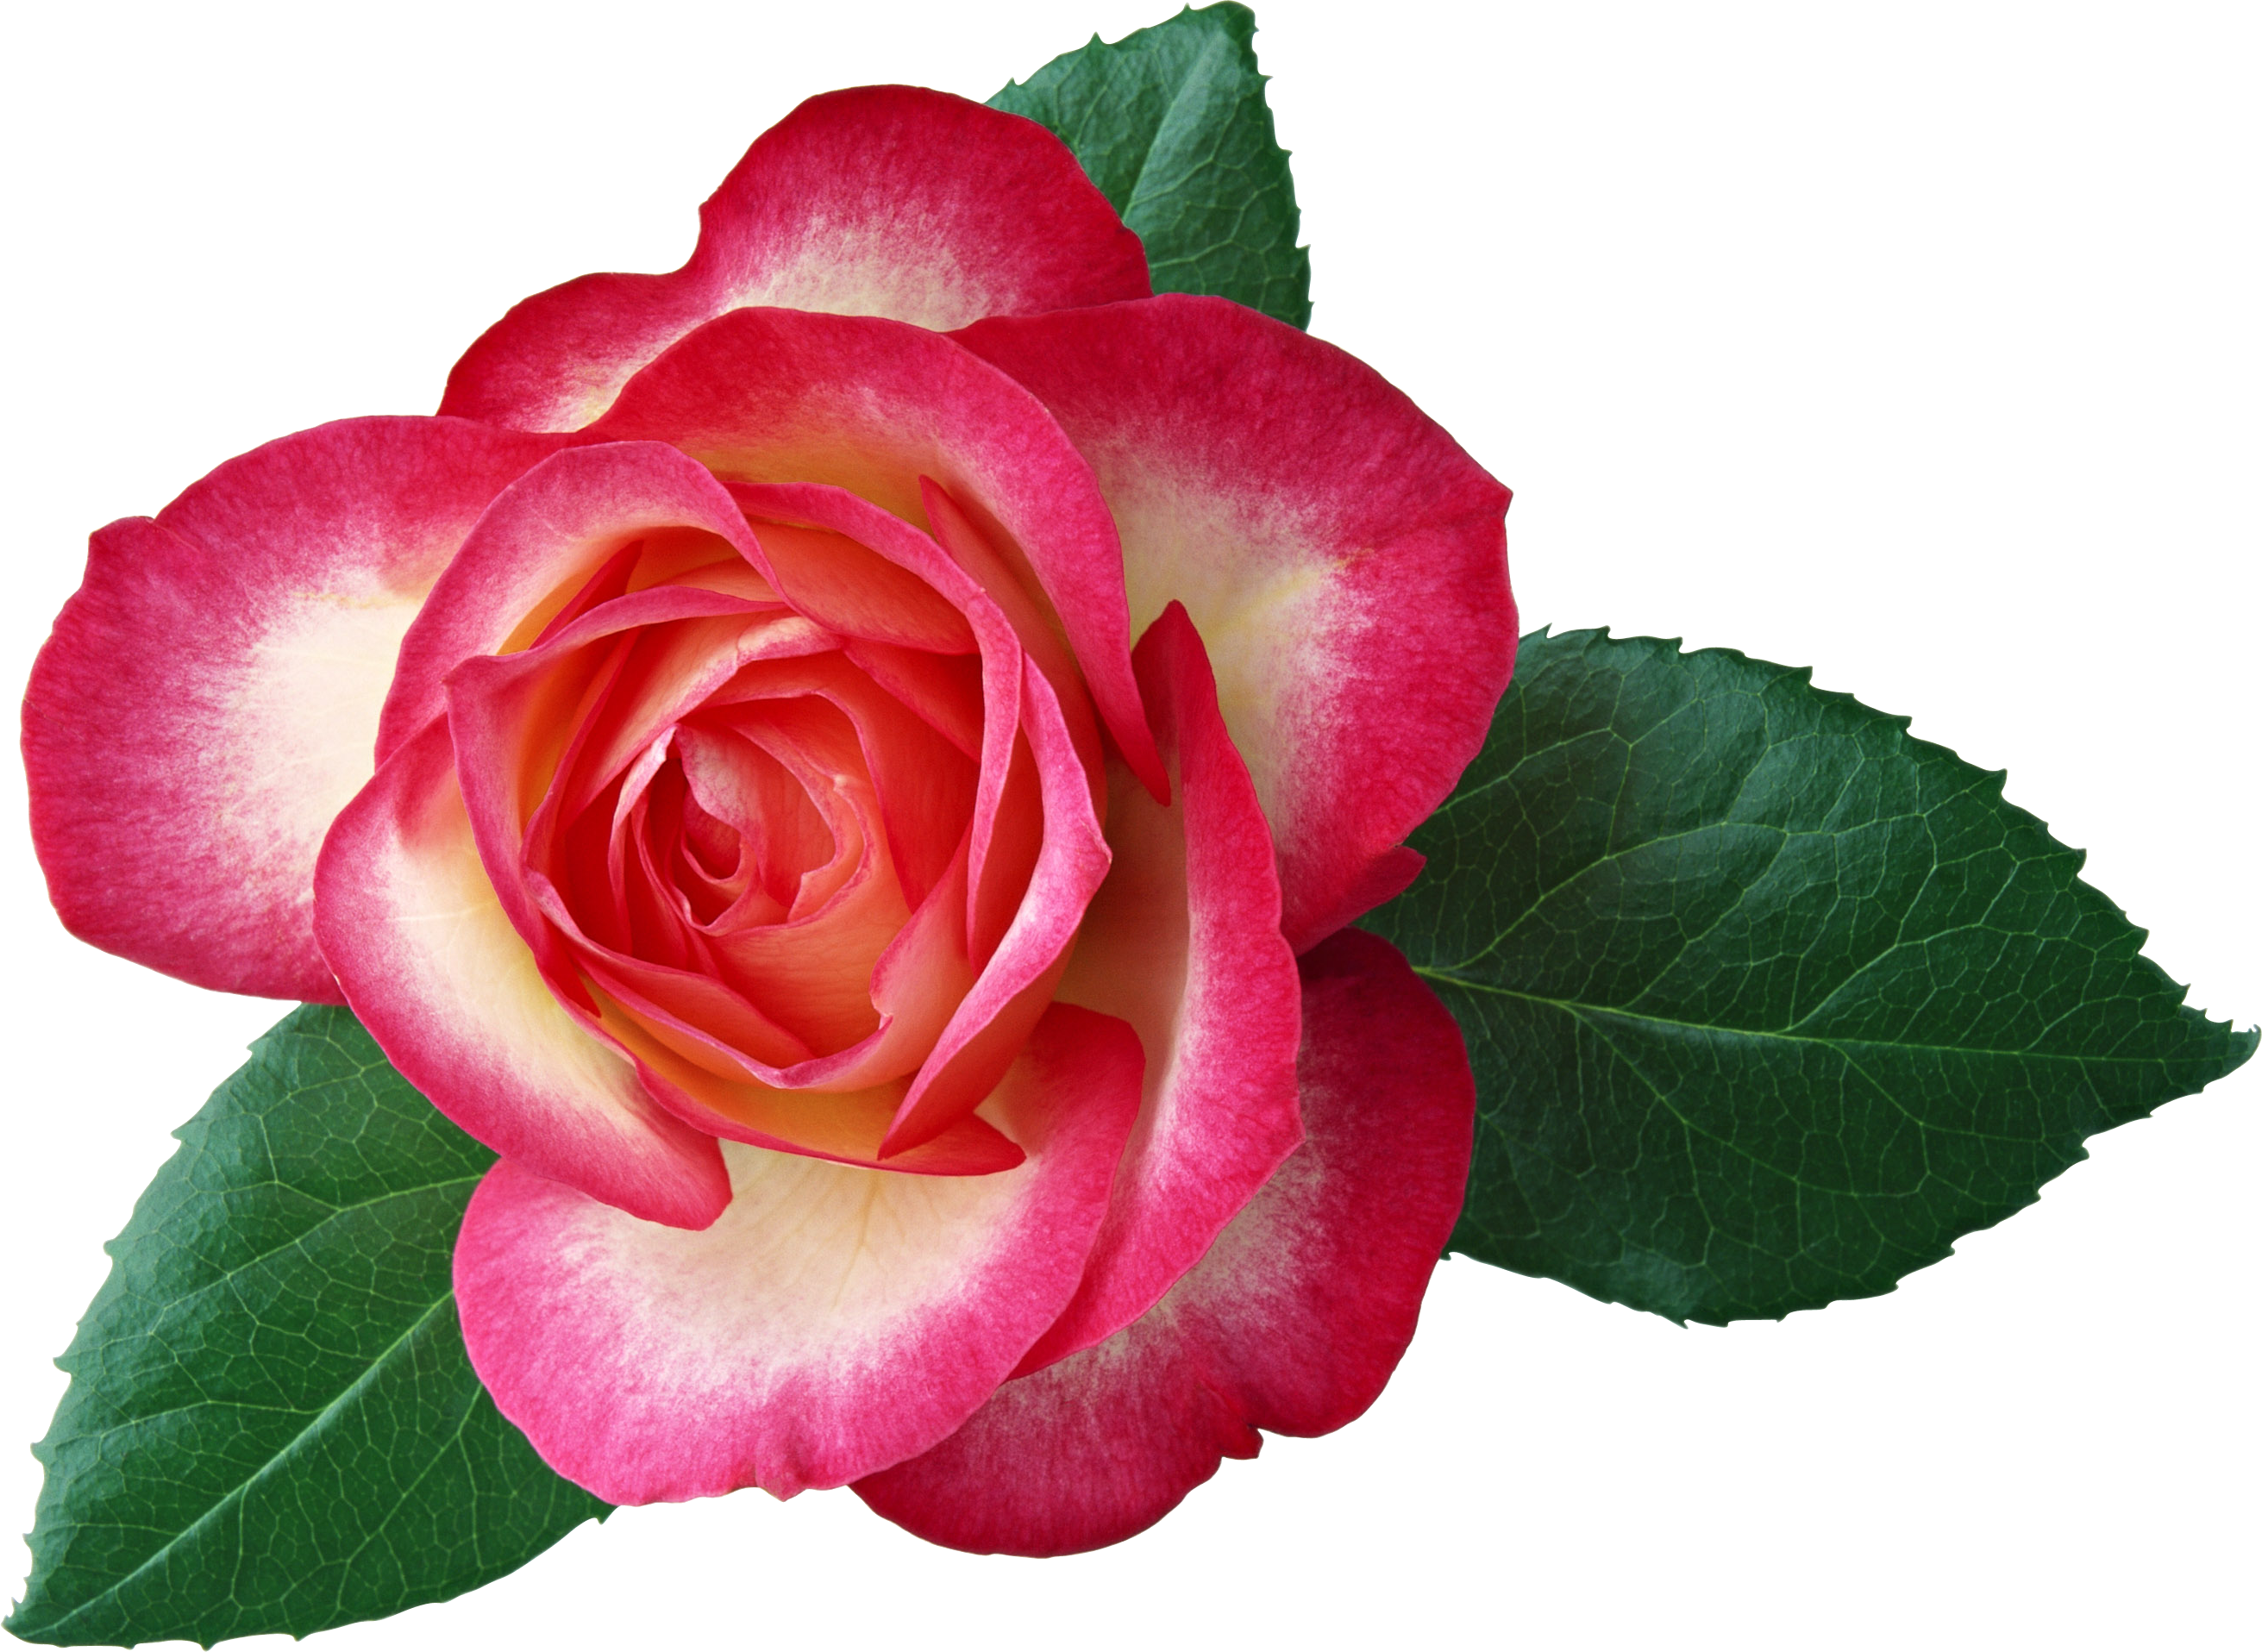 rose clipart high resolution